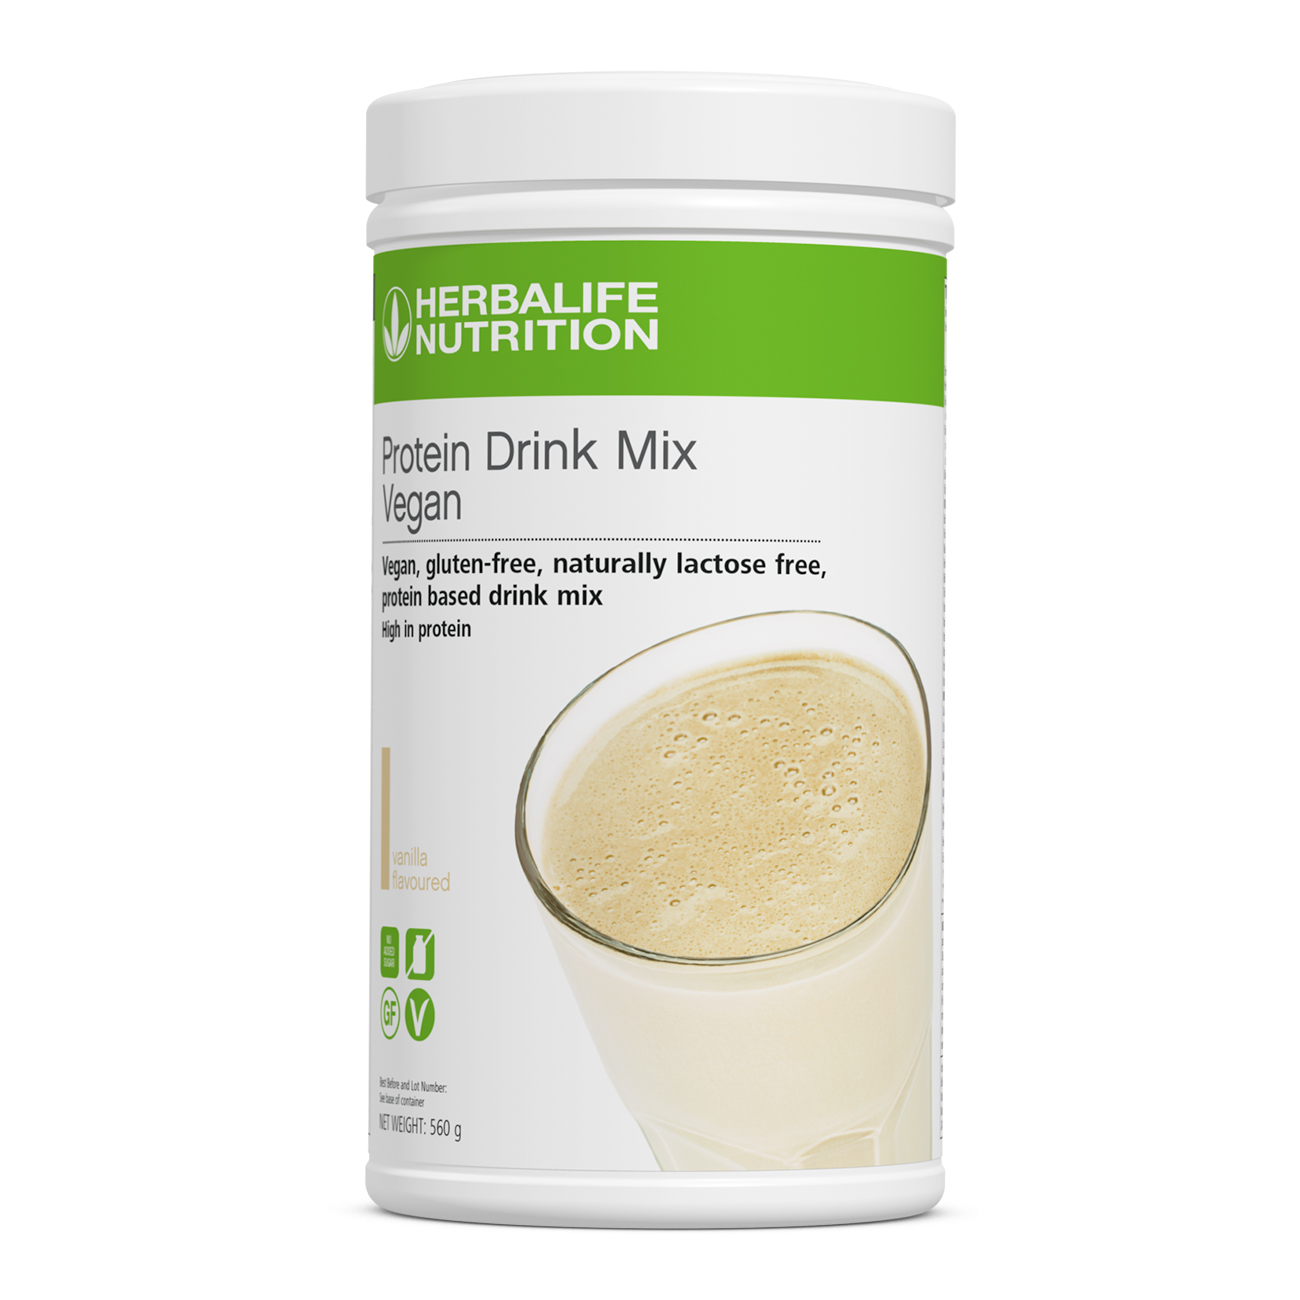 Protein Drink Mix-Vegan is an ideal way to boost your protein intake throughout the day. Combine with your favourite Formula 1 shake for a healthy meal that's high in protein and low in sugar.  